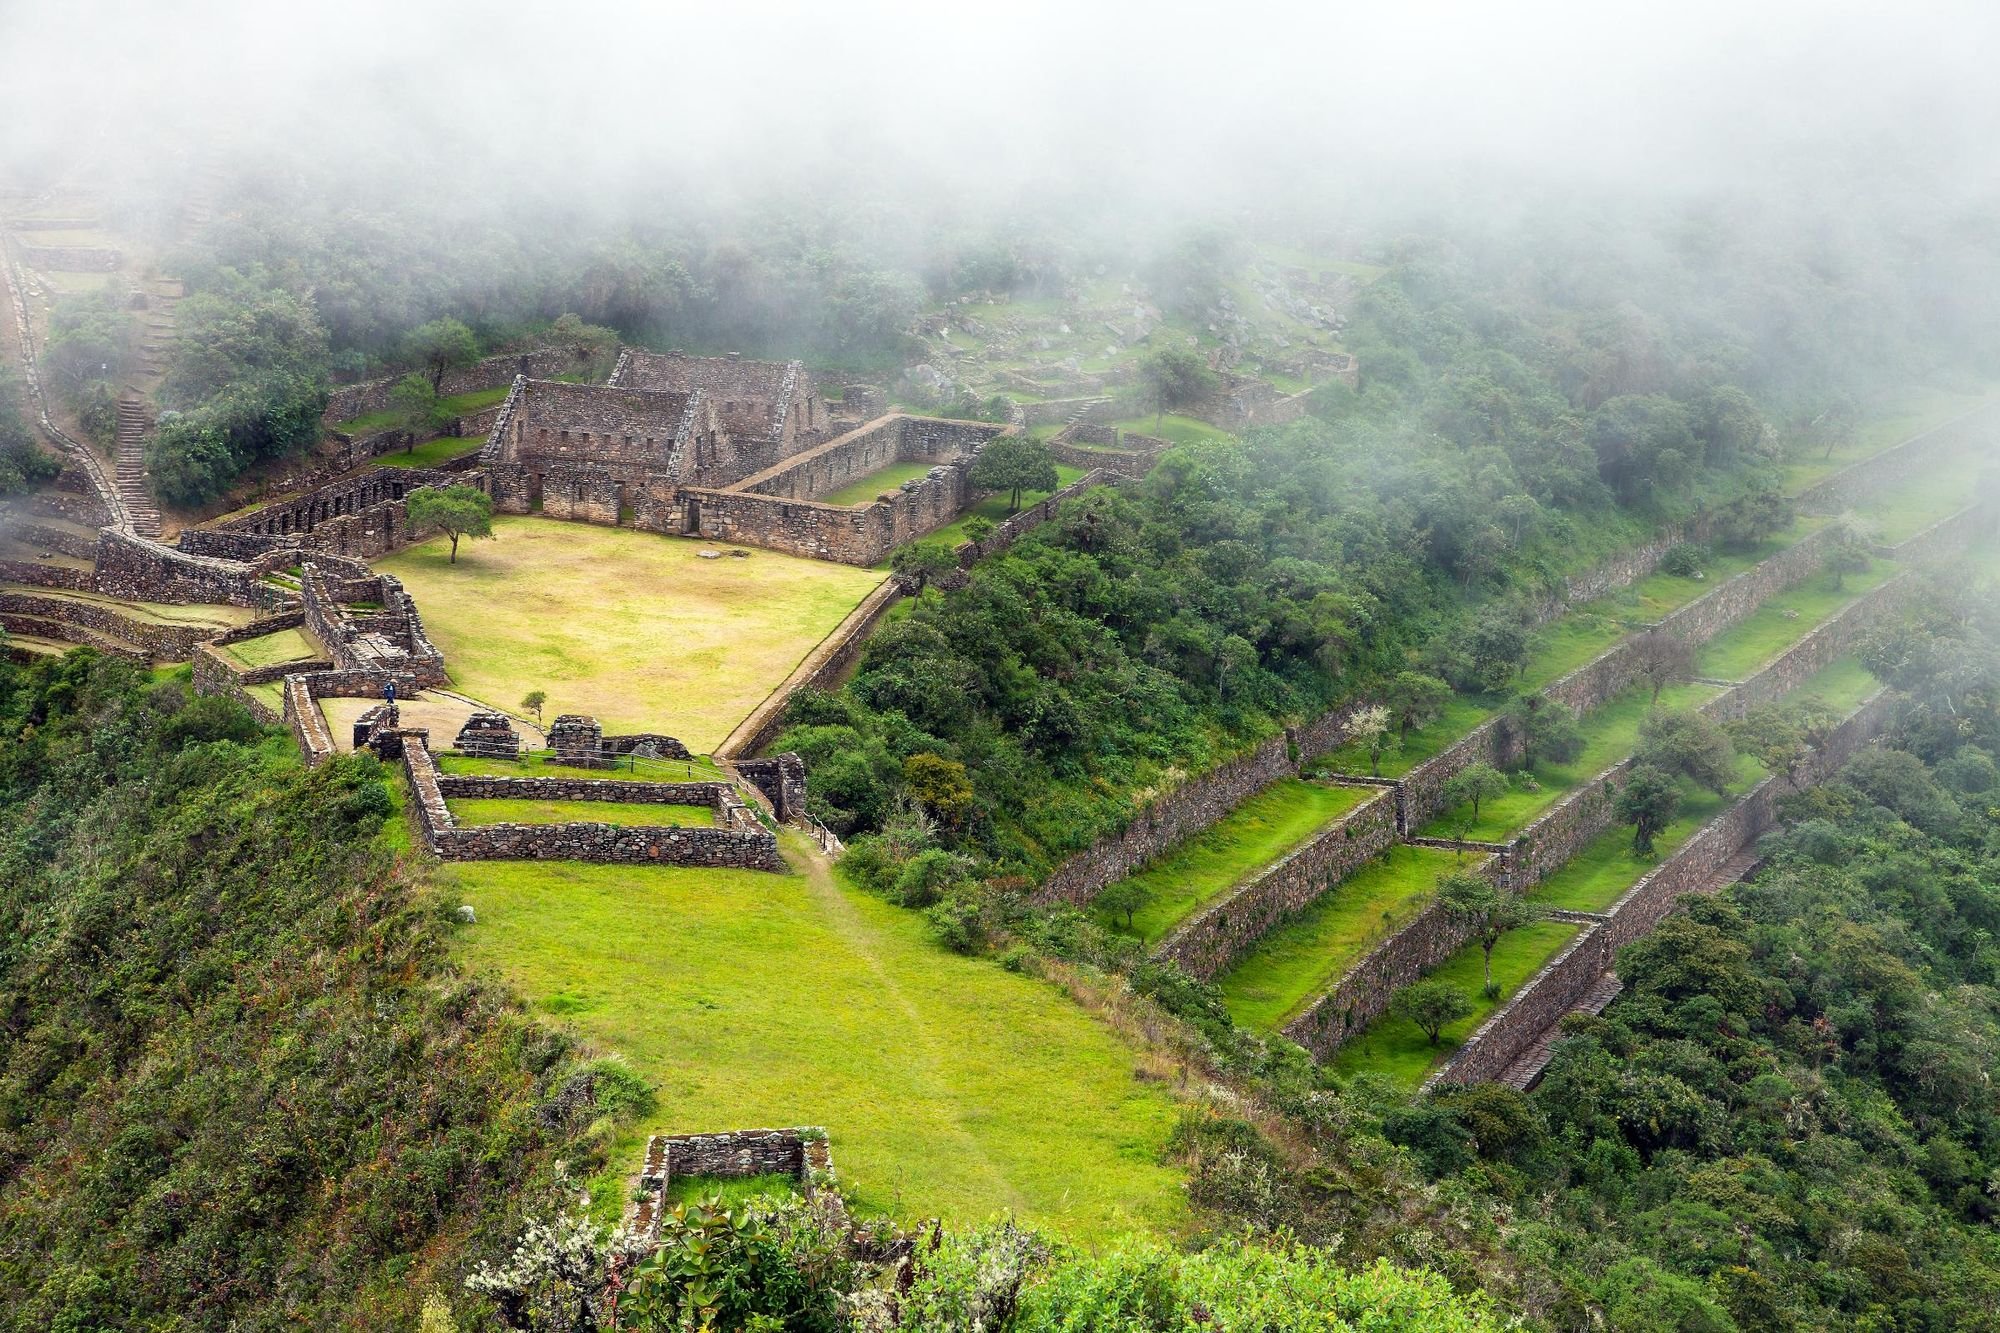 A birds eye view of the Choquequirao site, and the Incan terraces. Photo: Getty